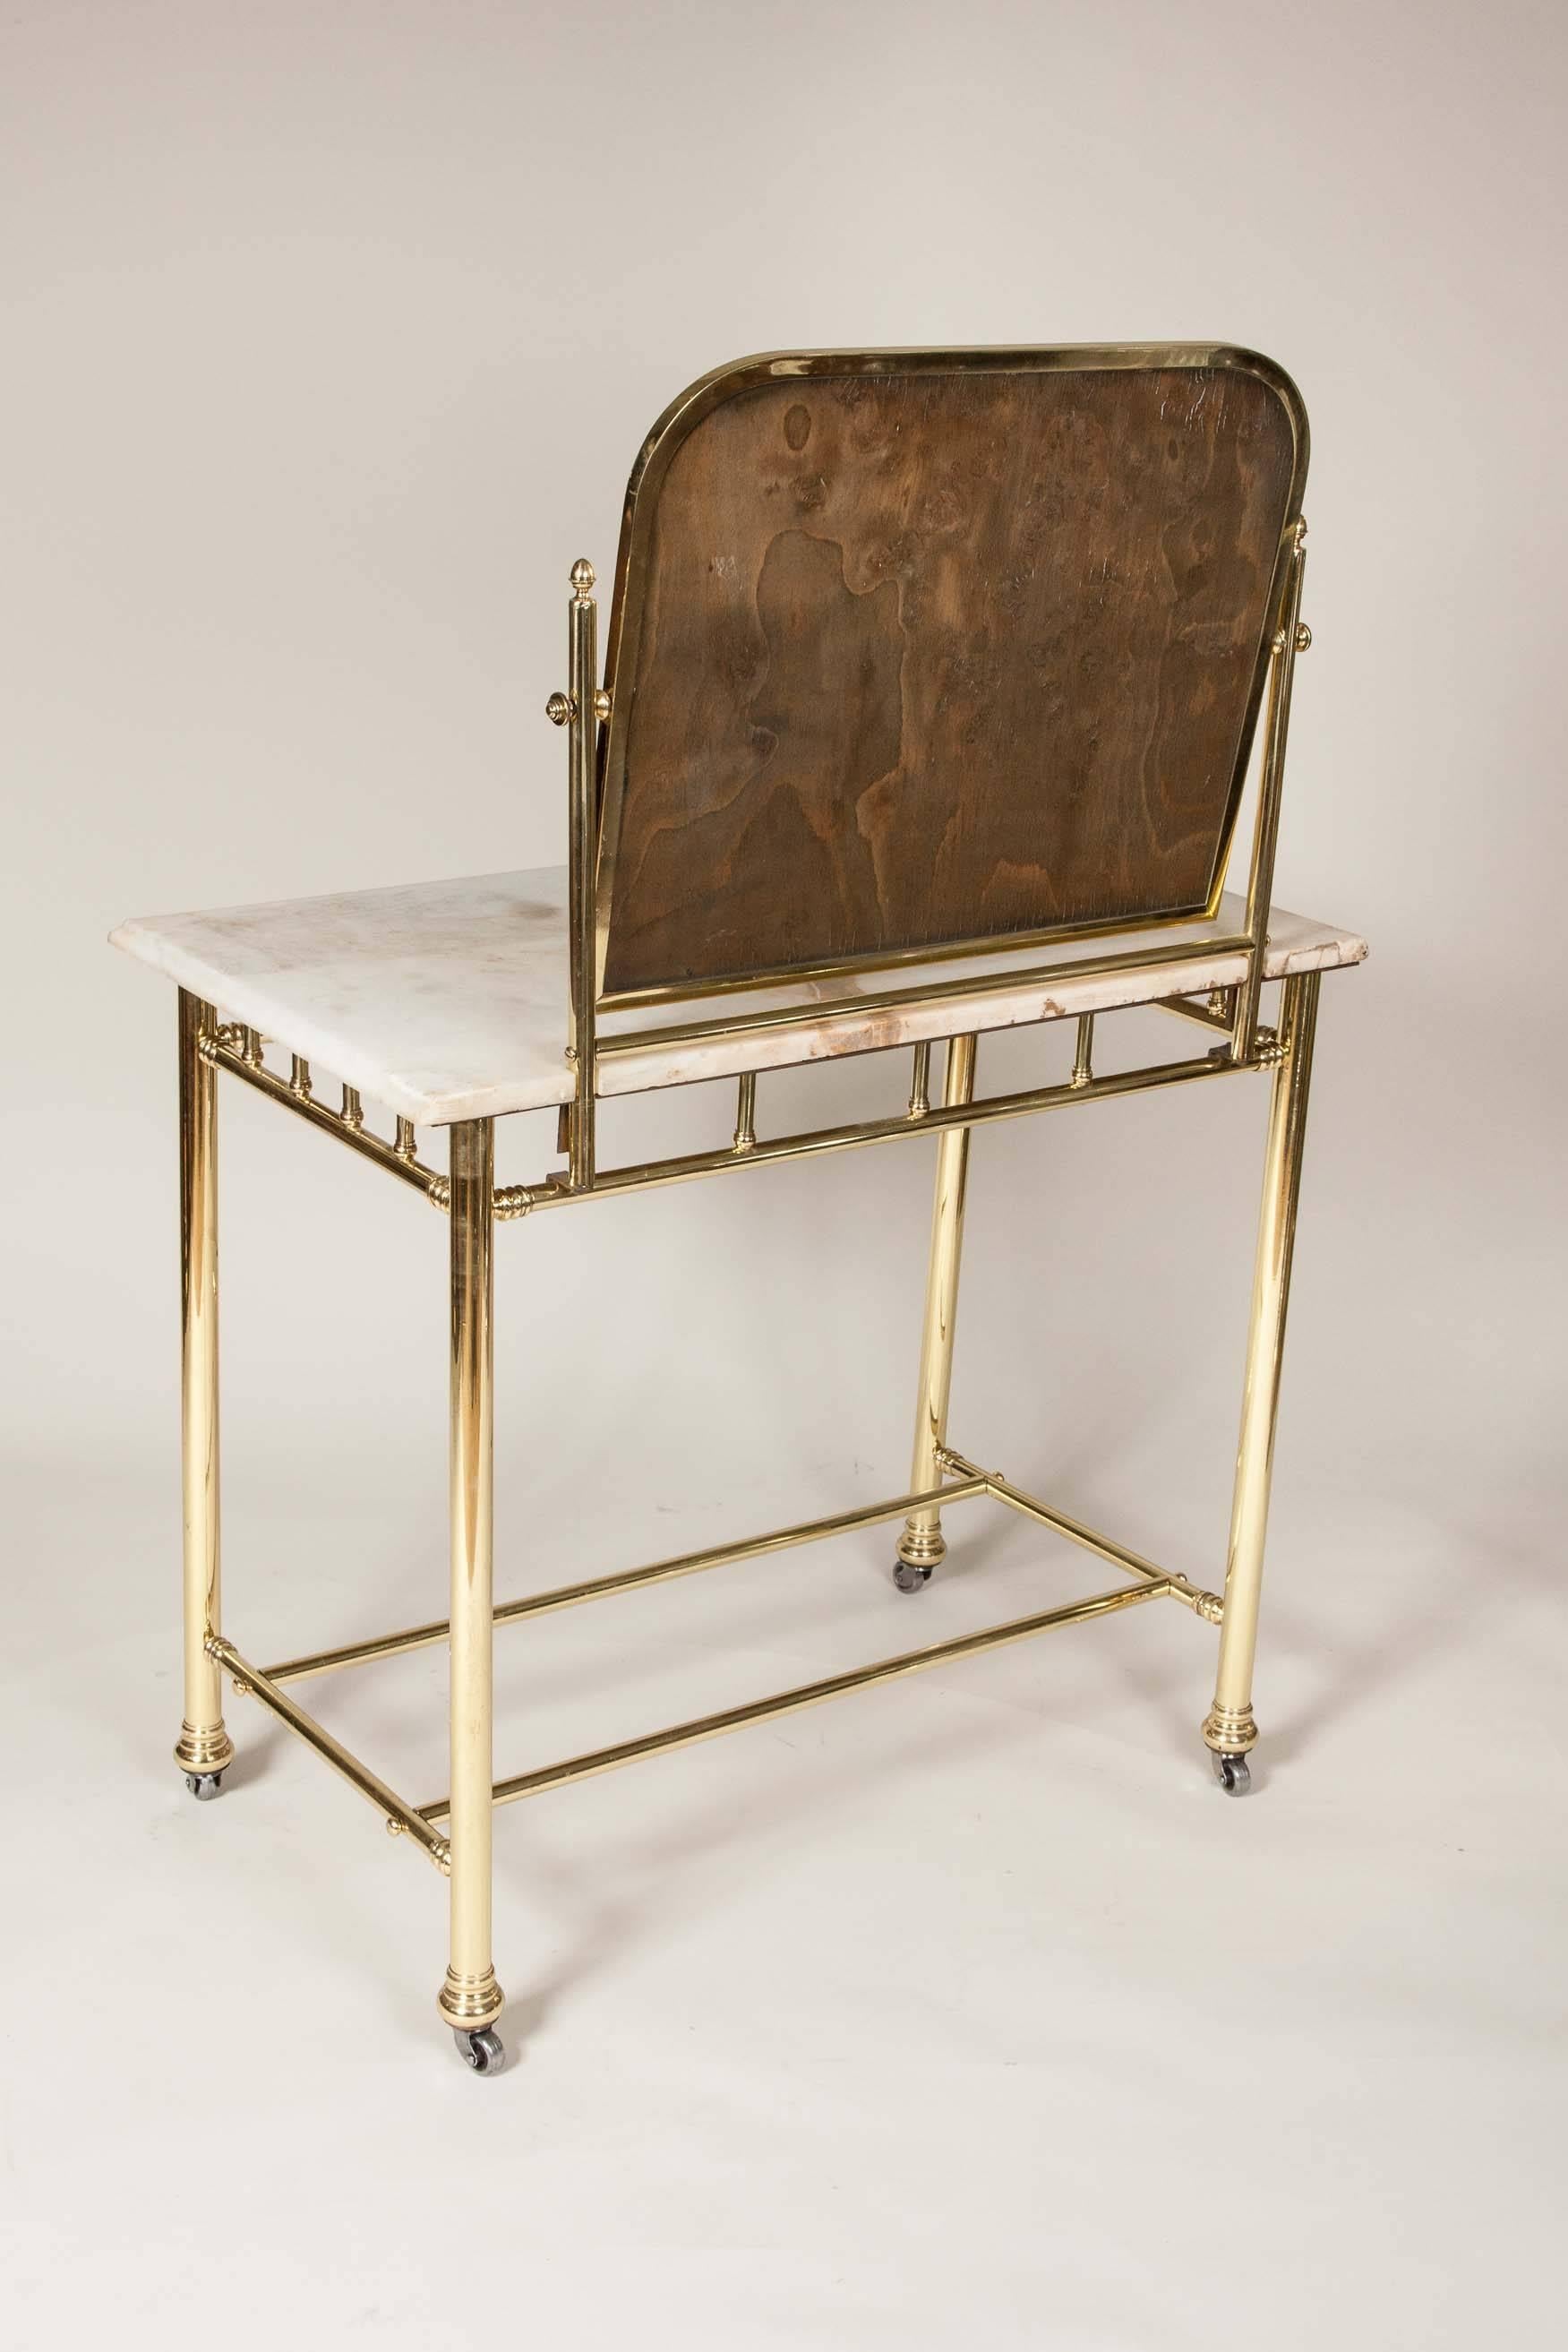 Brass An Edwardian brass dressing table with marble top, circa 1910.